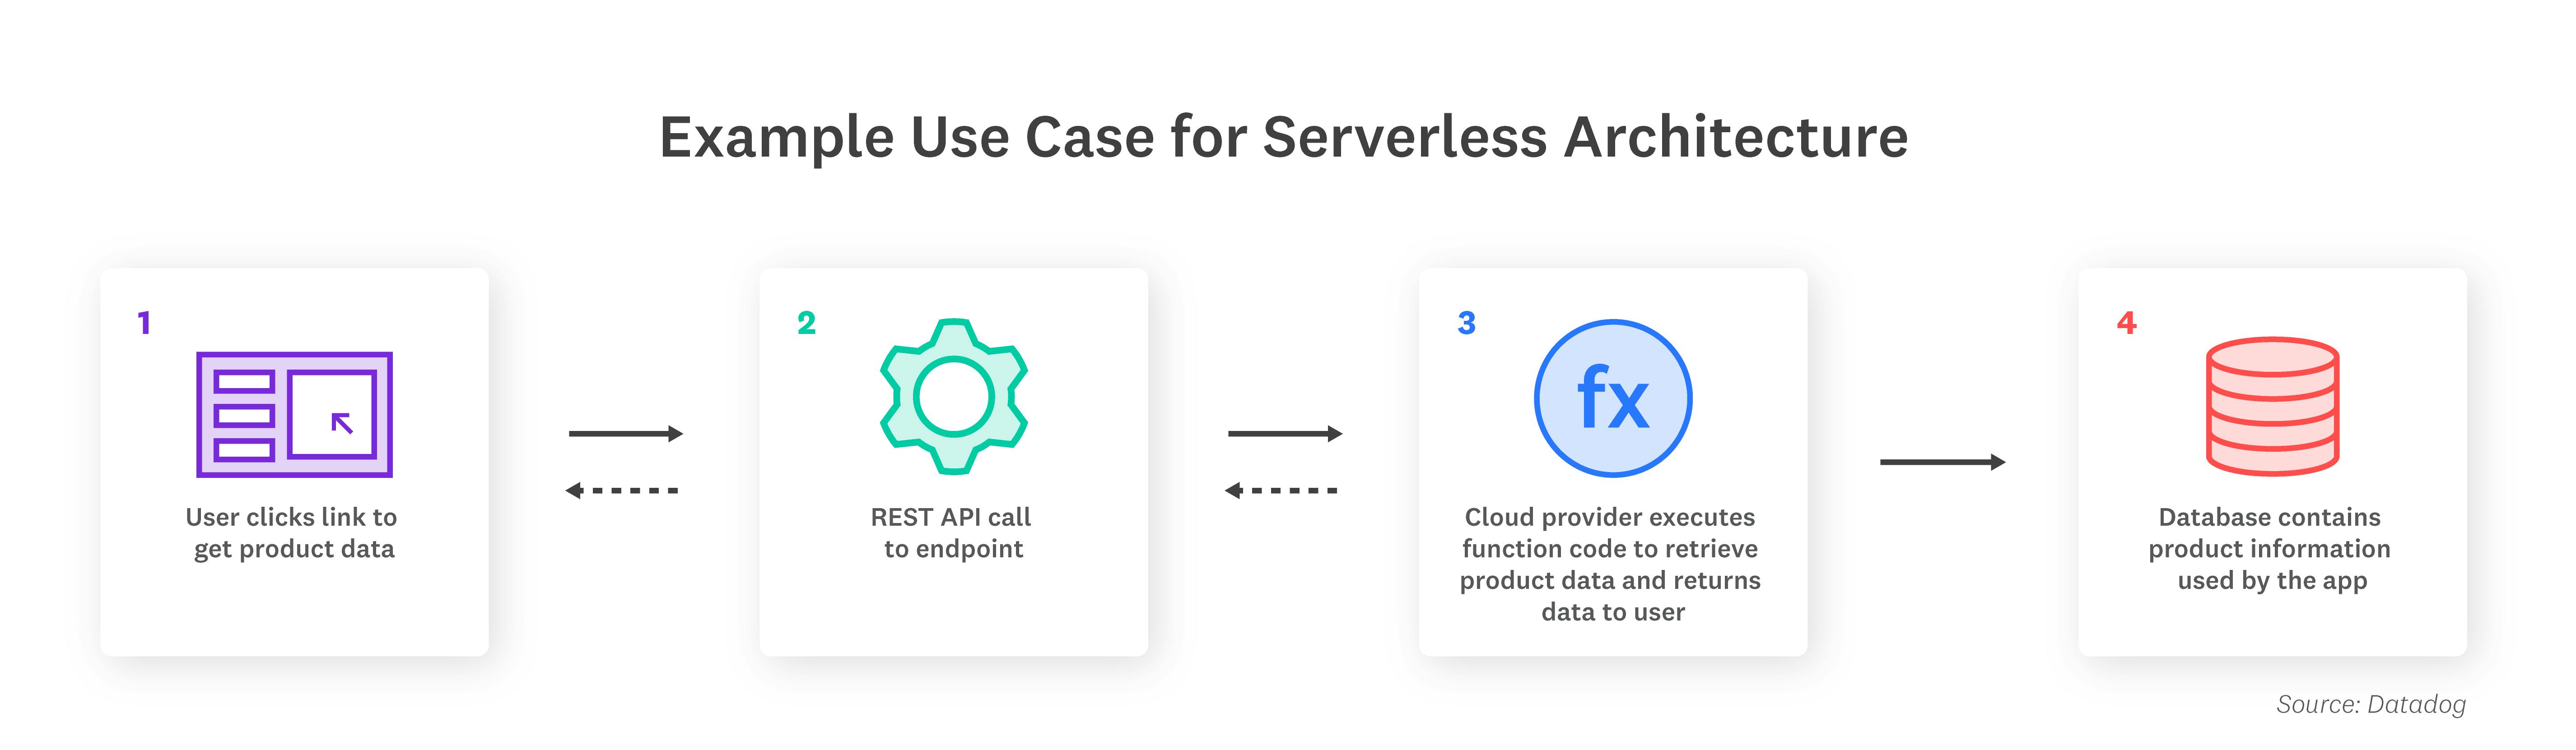 Serverless architecture has numerous use cases, such as this trigger-based workflow for retrieving and displaying product information.